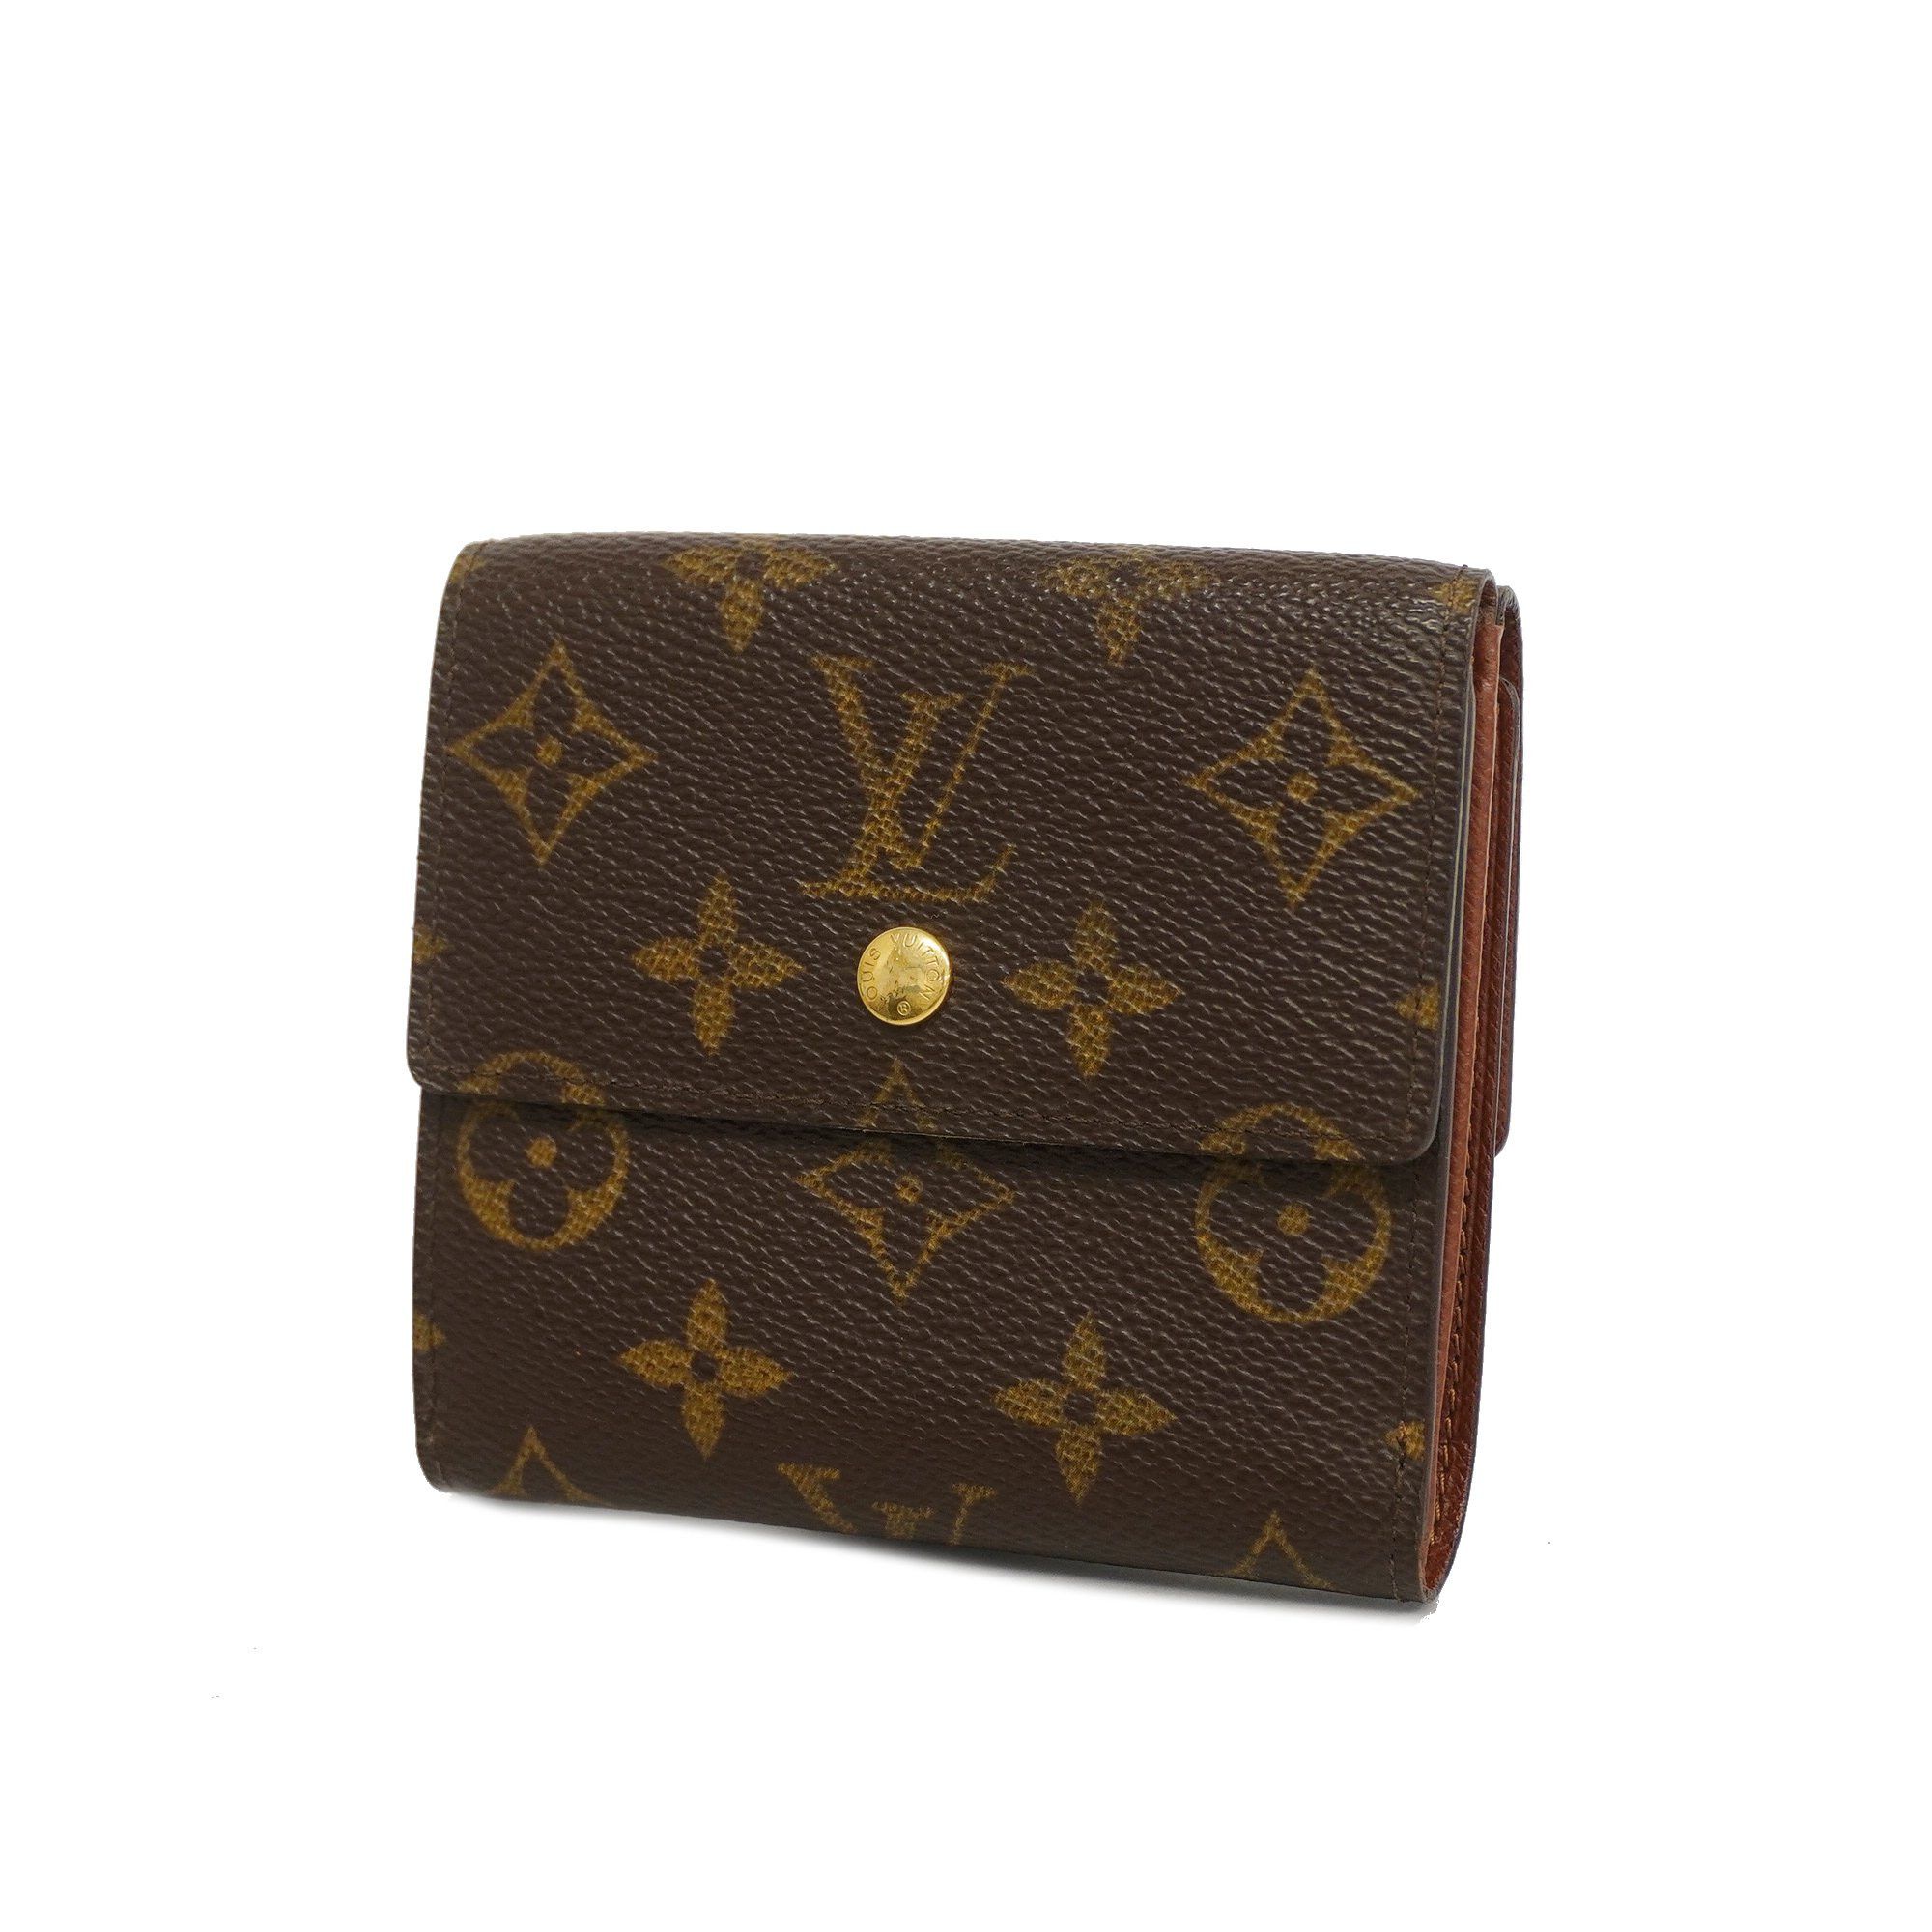 Authenticated Used Louis Vuitton Monogram Portefeuille Cult Credit